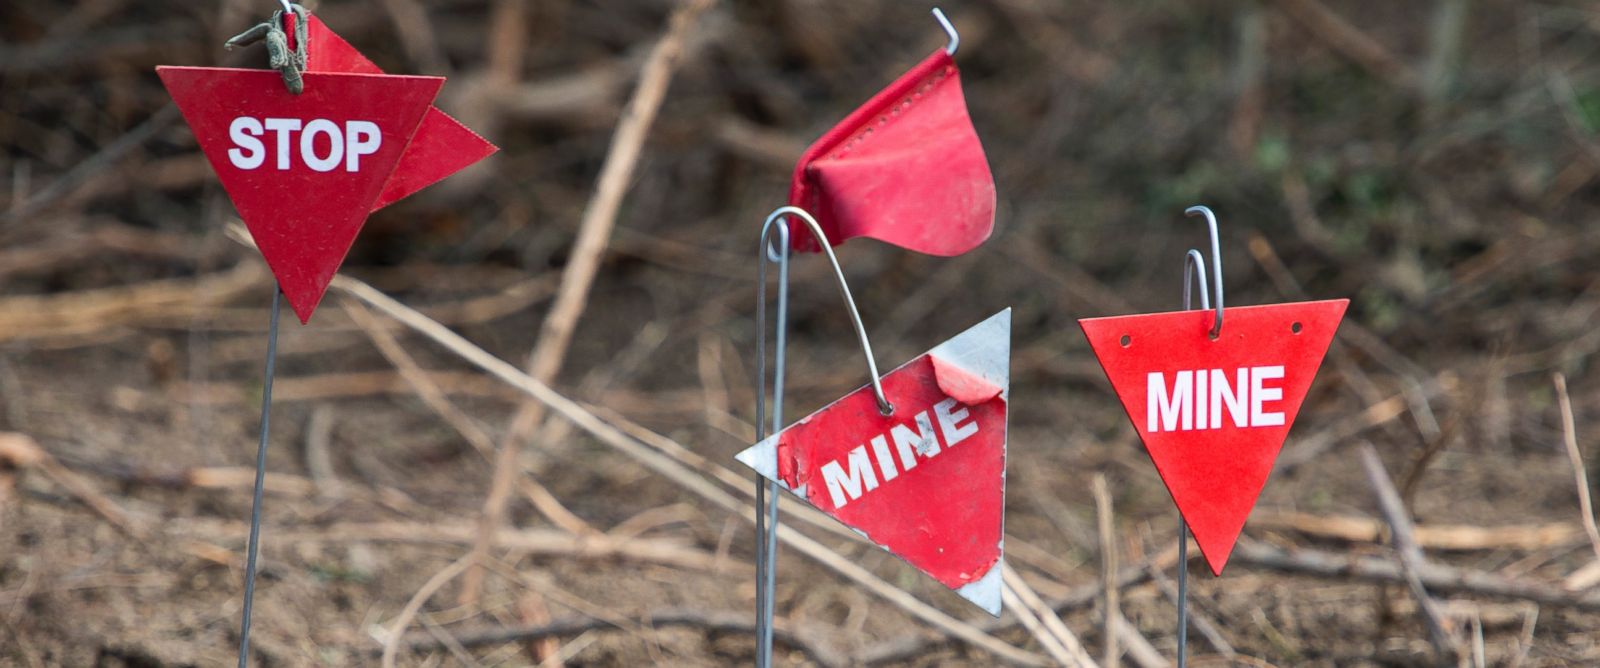 PHOTO: Landmines are found and marked in a minefield near Lasinja, Croatia, in this file photo, May 29, 2013. 